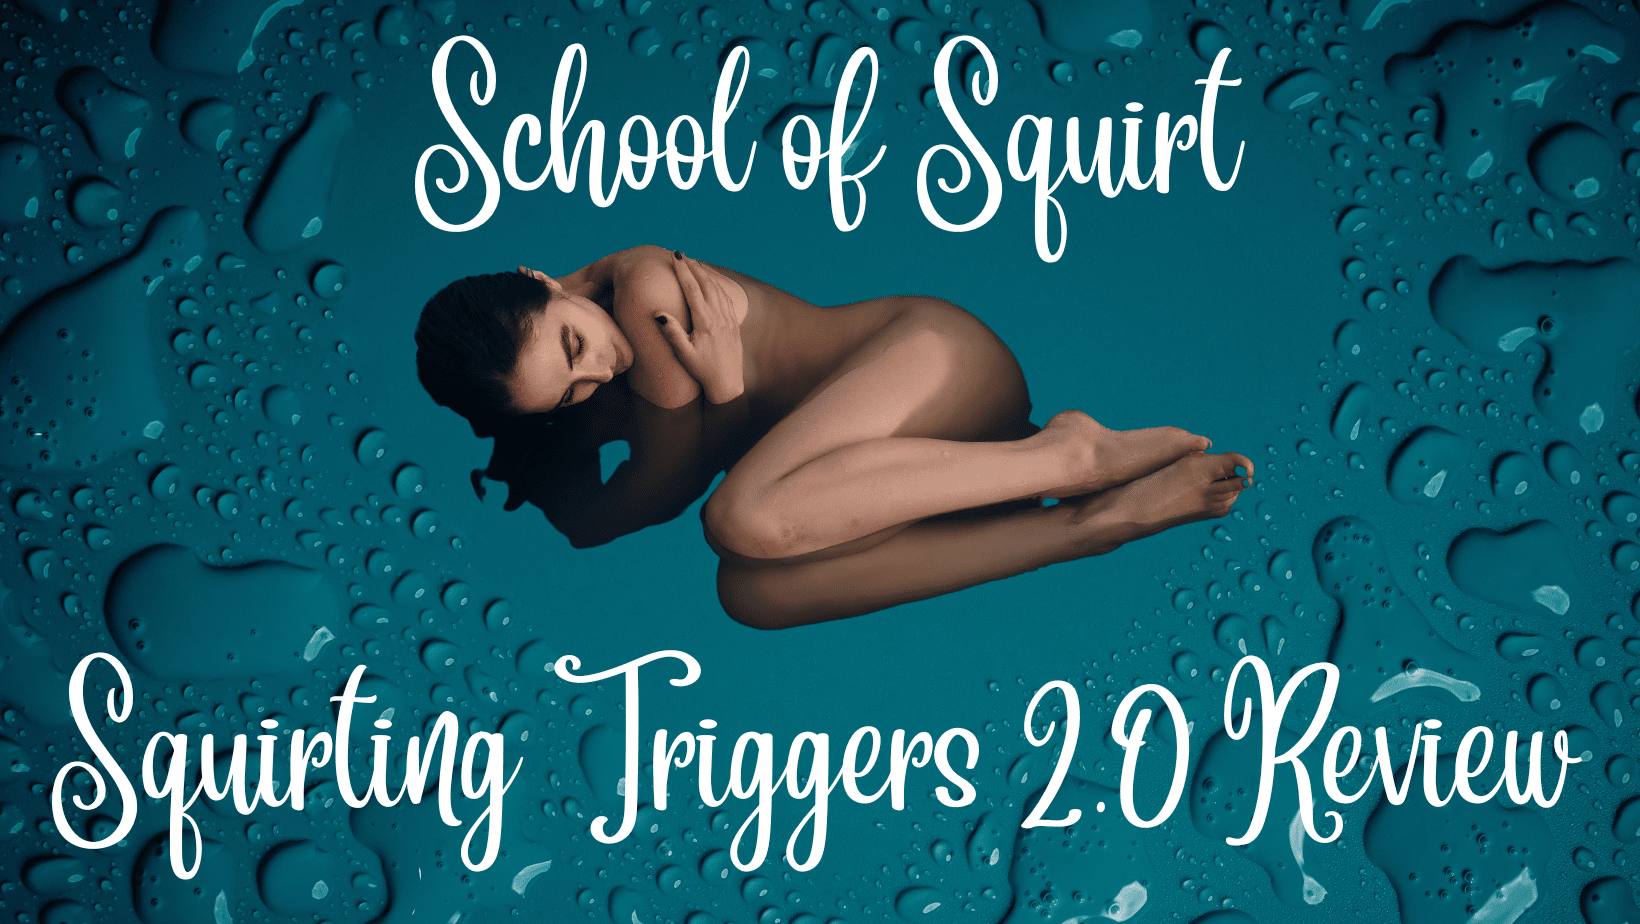 The School of Squirt: Squirting Triggers 2.0 Review